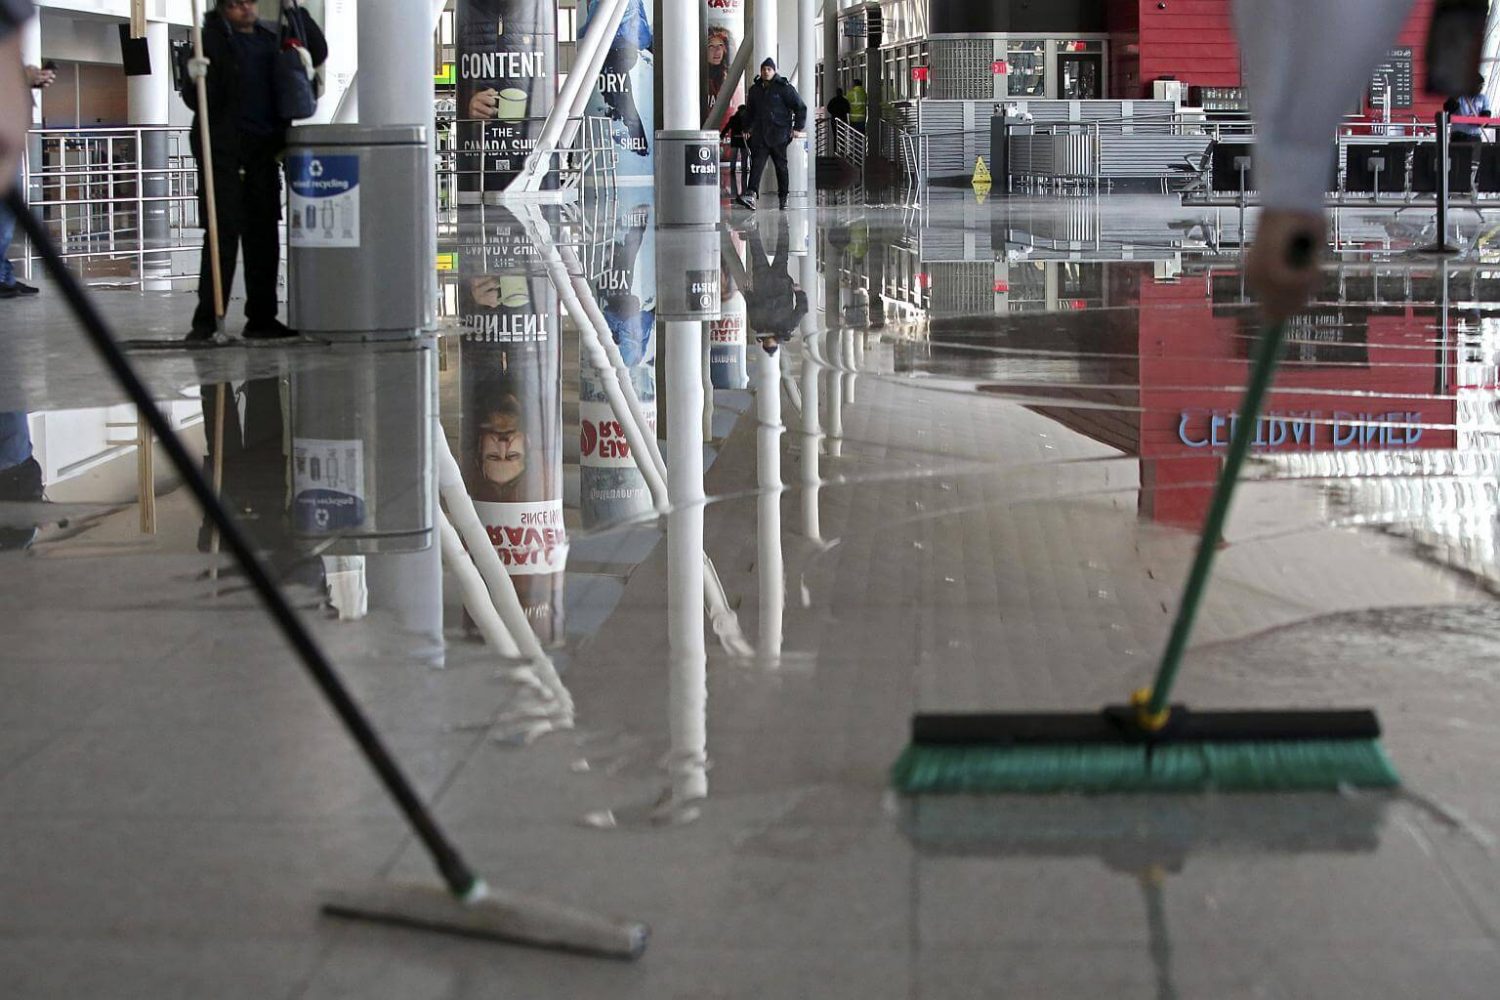 Employees clean up water from a broken water main at Terminal 4 of John F. Kennedy International Airport in New York, on Jan 7, 2018. PHOTO: NYTIMES